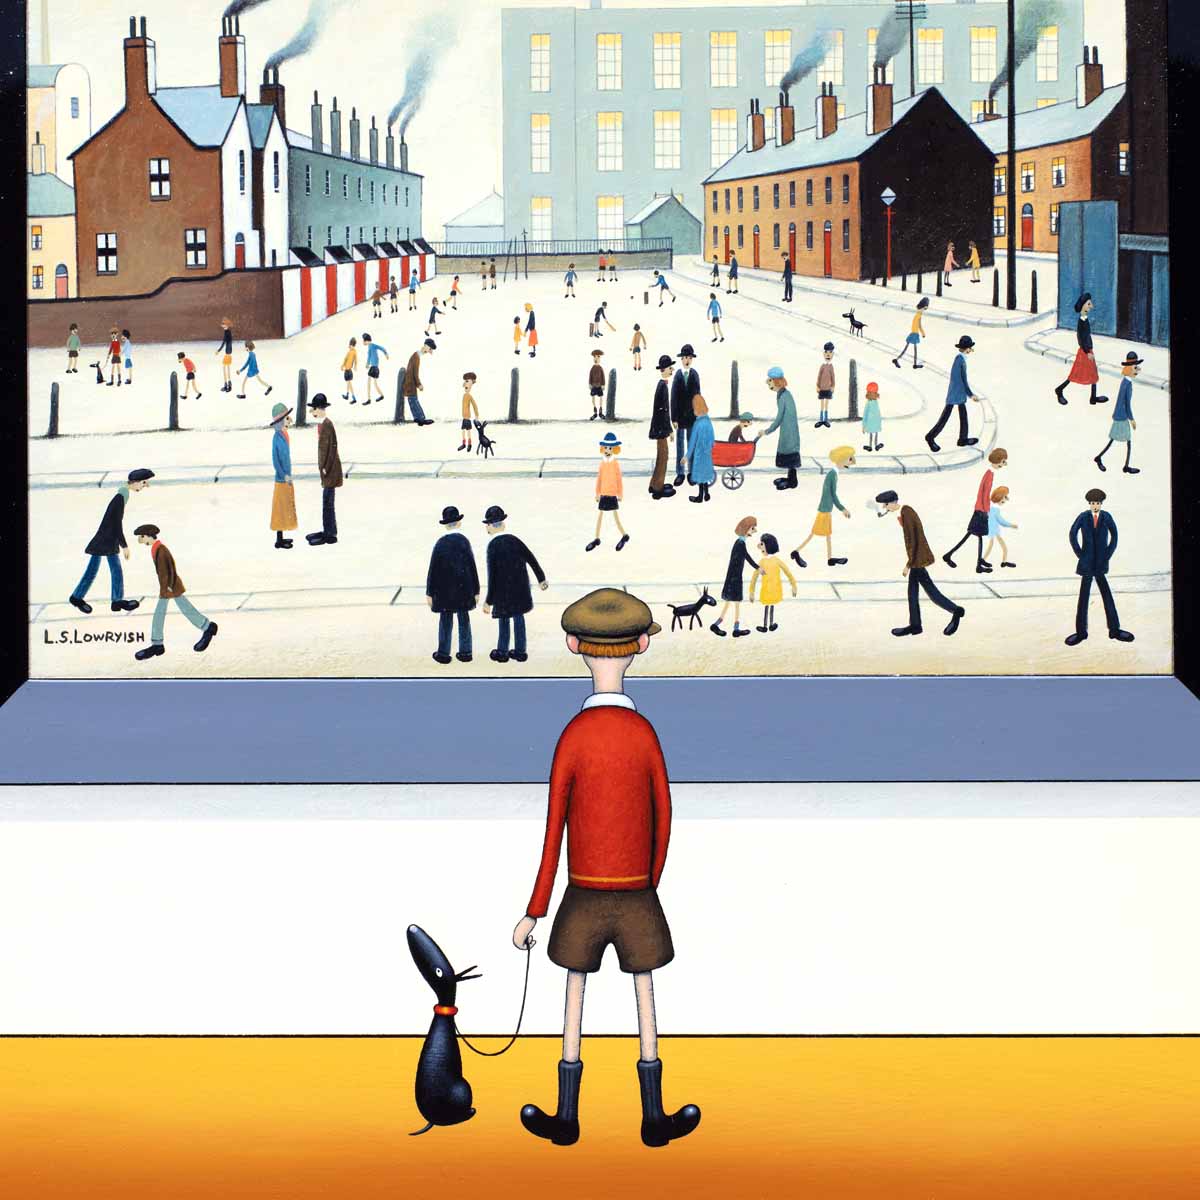 The Hustle and Bustle of Town - Original Chris Chapman Framed